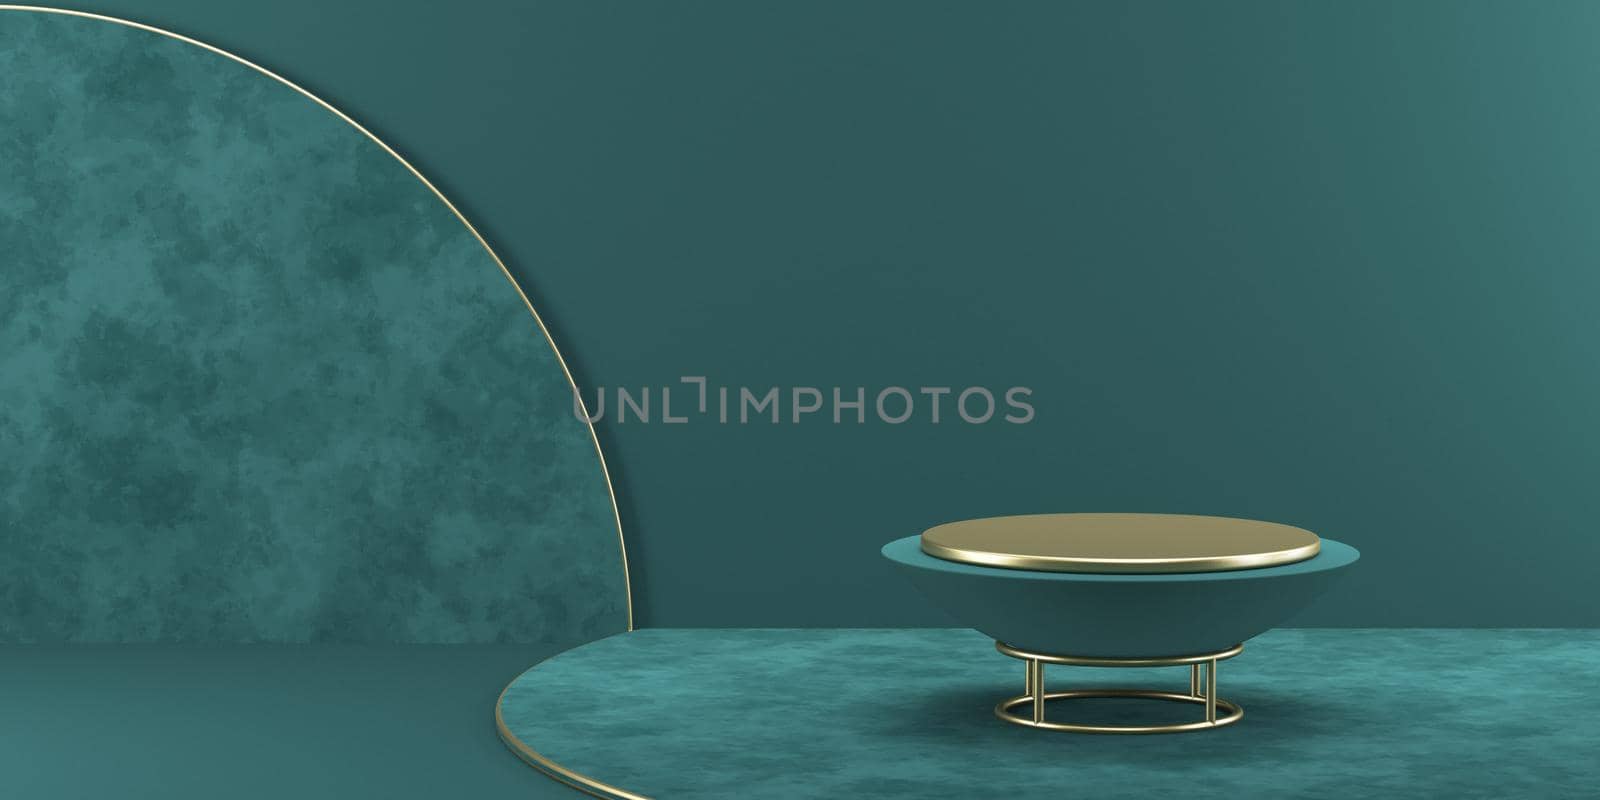 Mock up podium for product presentation textured circles and golden furniture stand 3D render illustration on green background